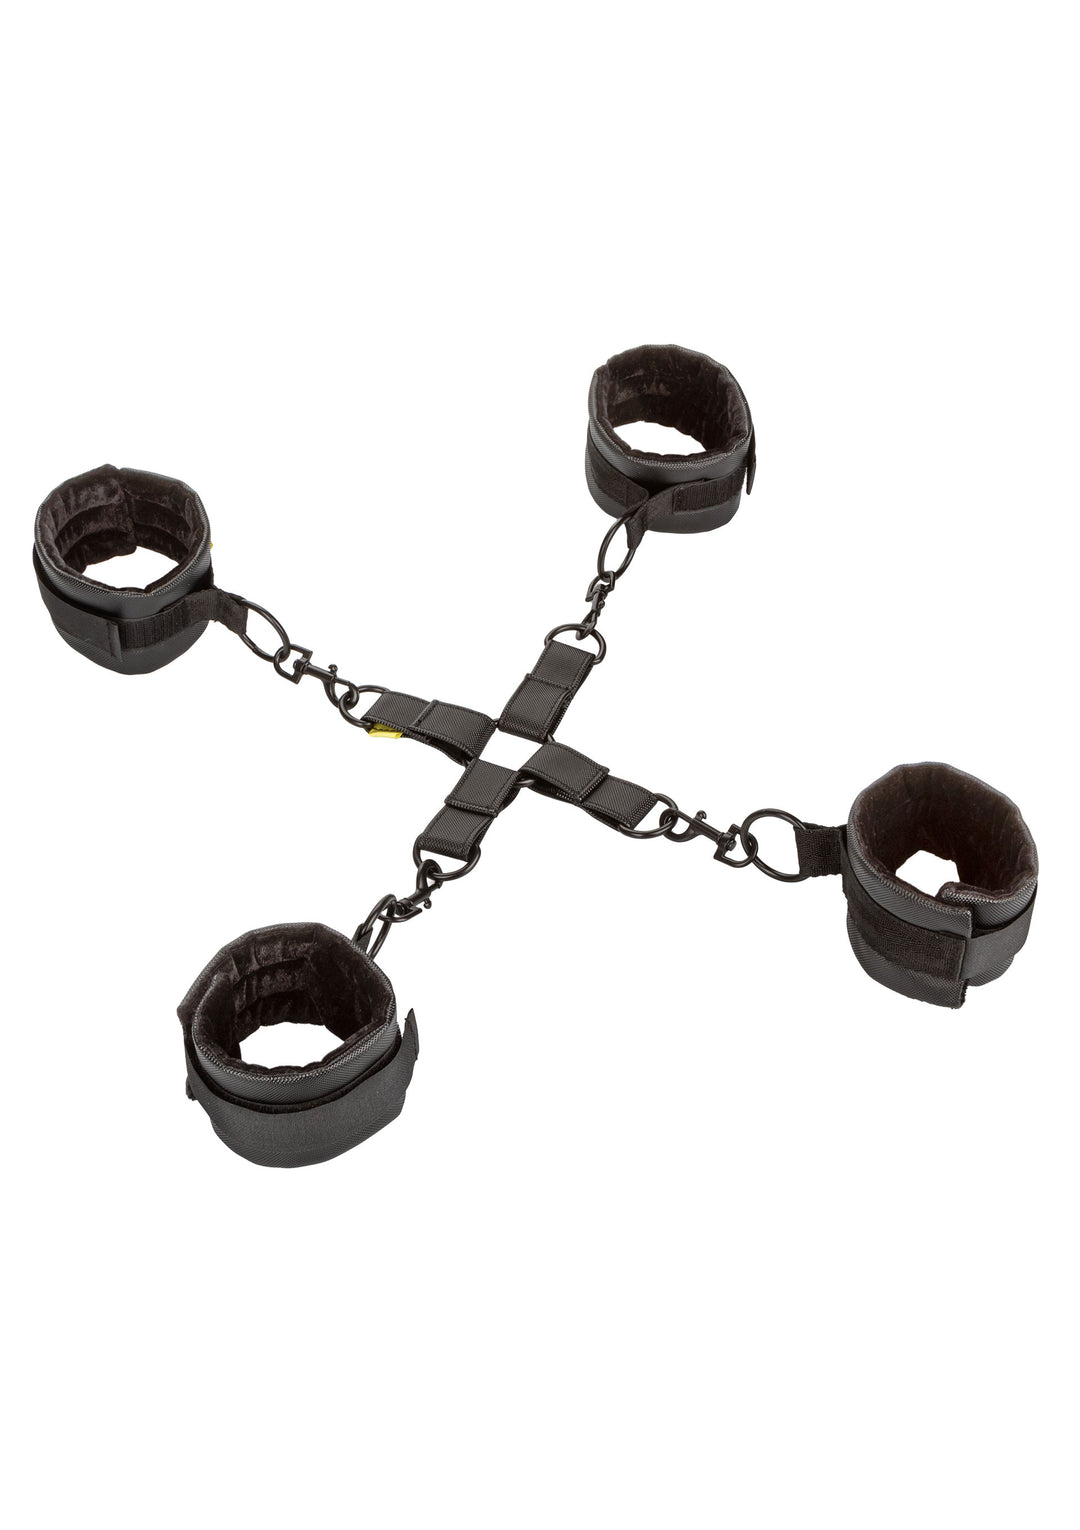 Kit of 4 Boundless Hog Tie ankle cuffs